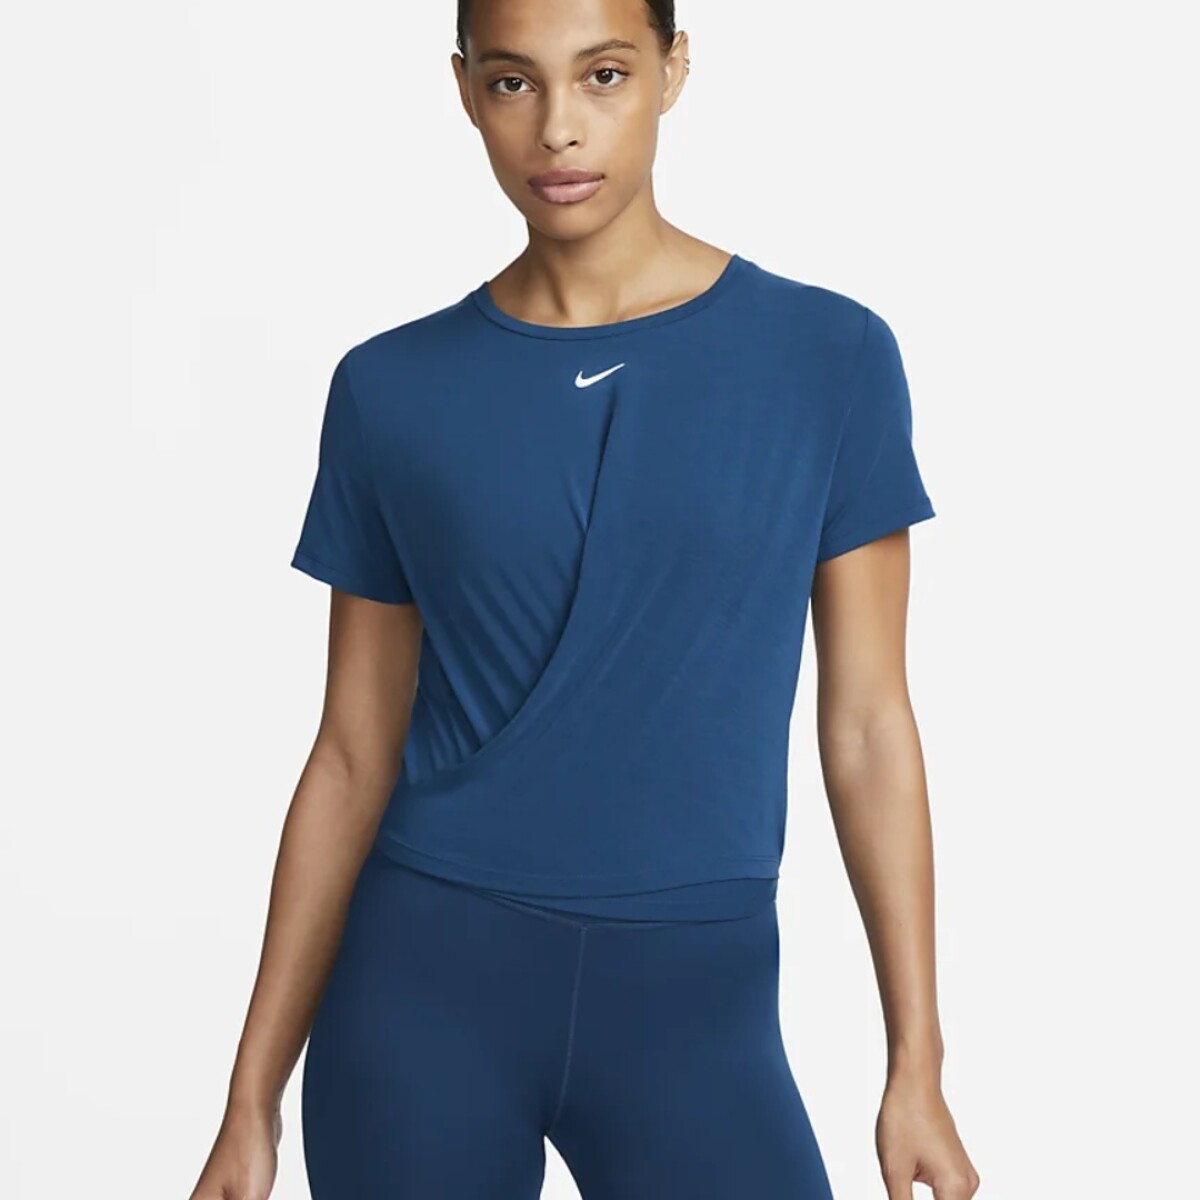 Remera Nike Training Dama One Luxe DF SS Std TW TP - S/C 